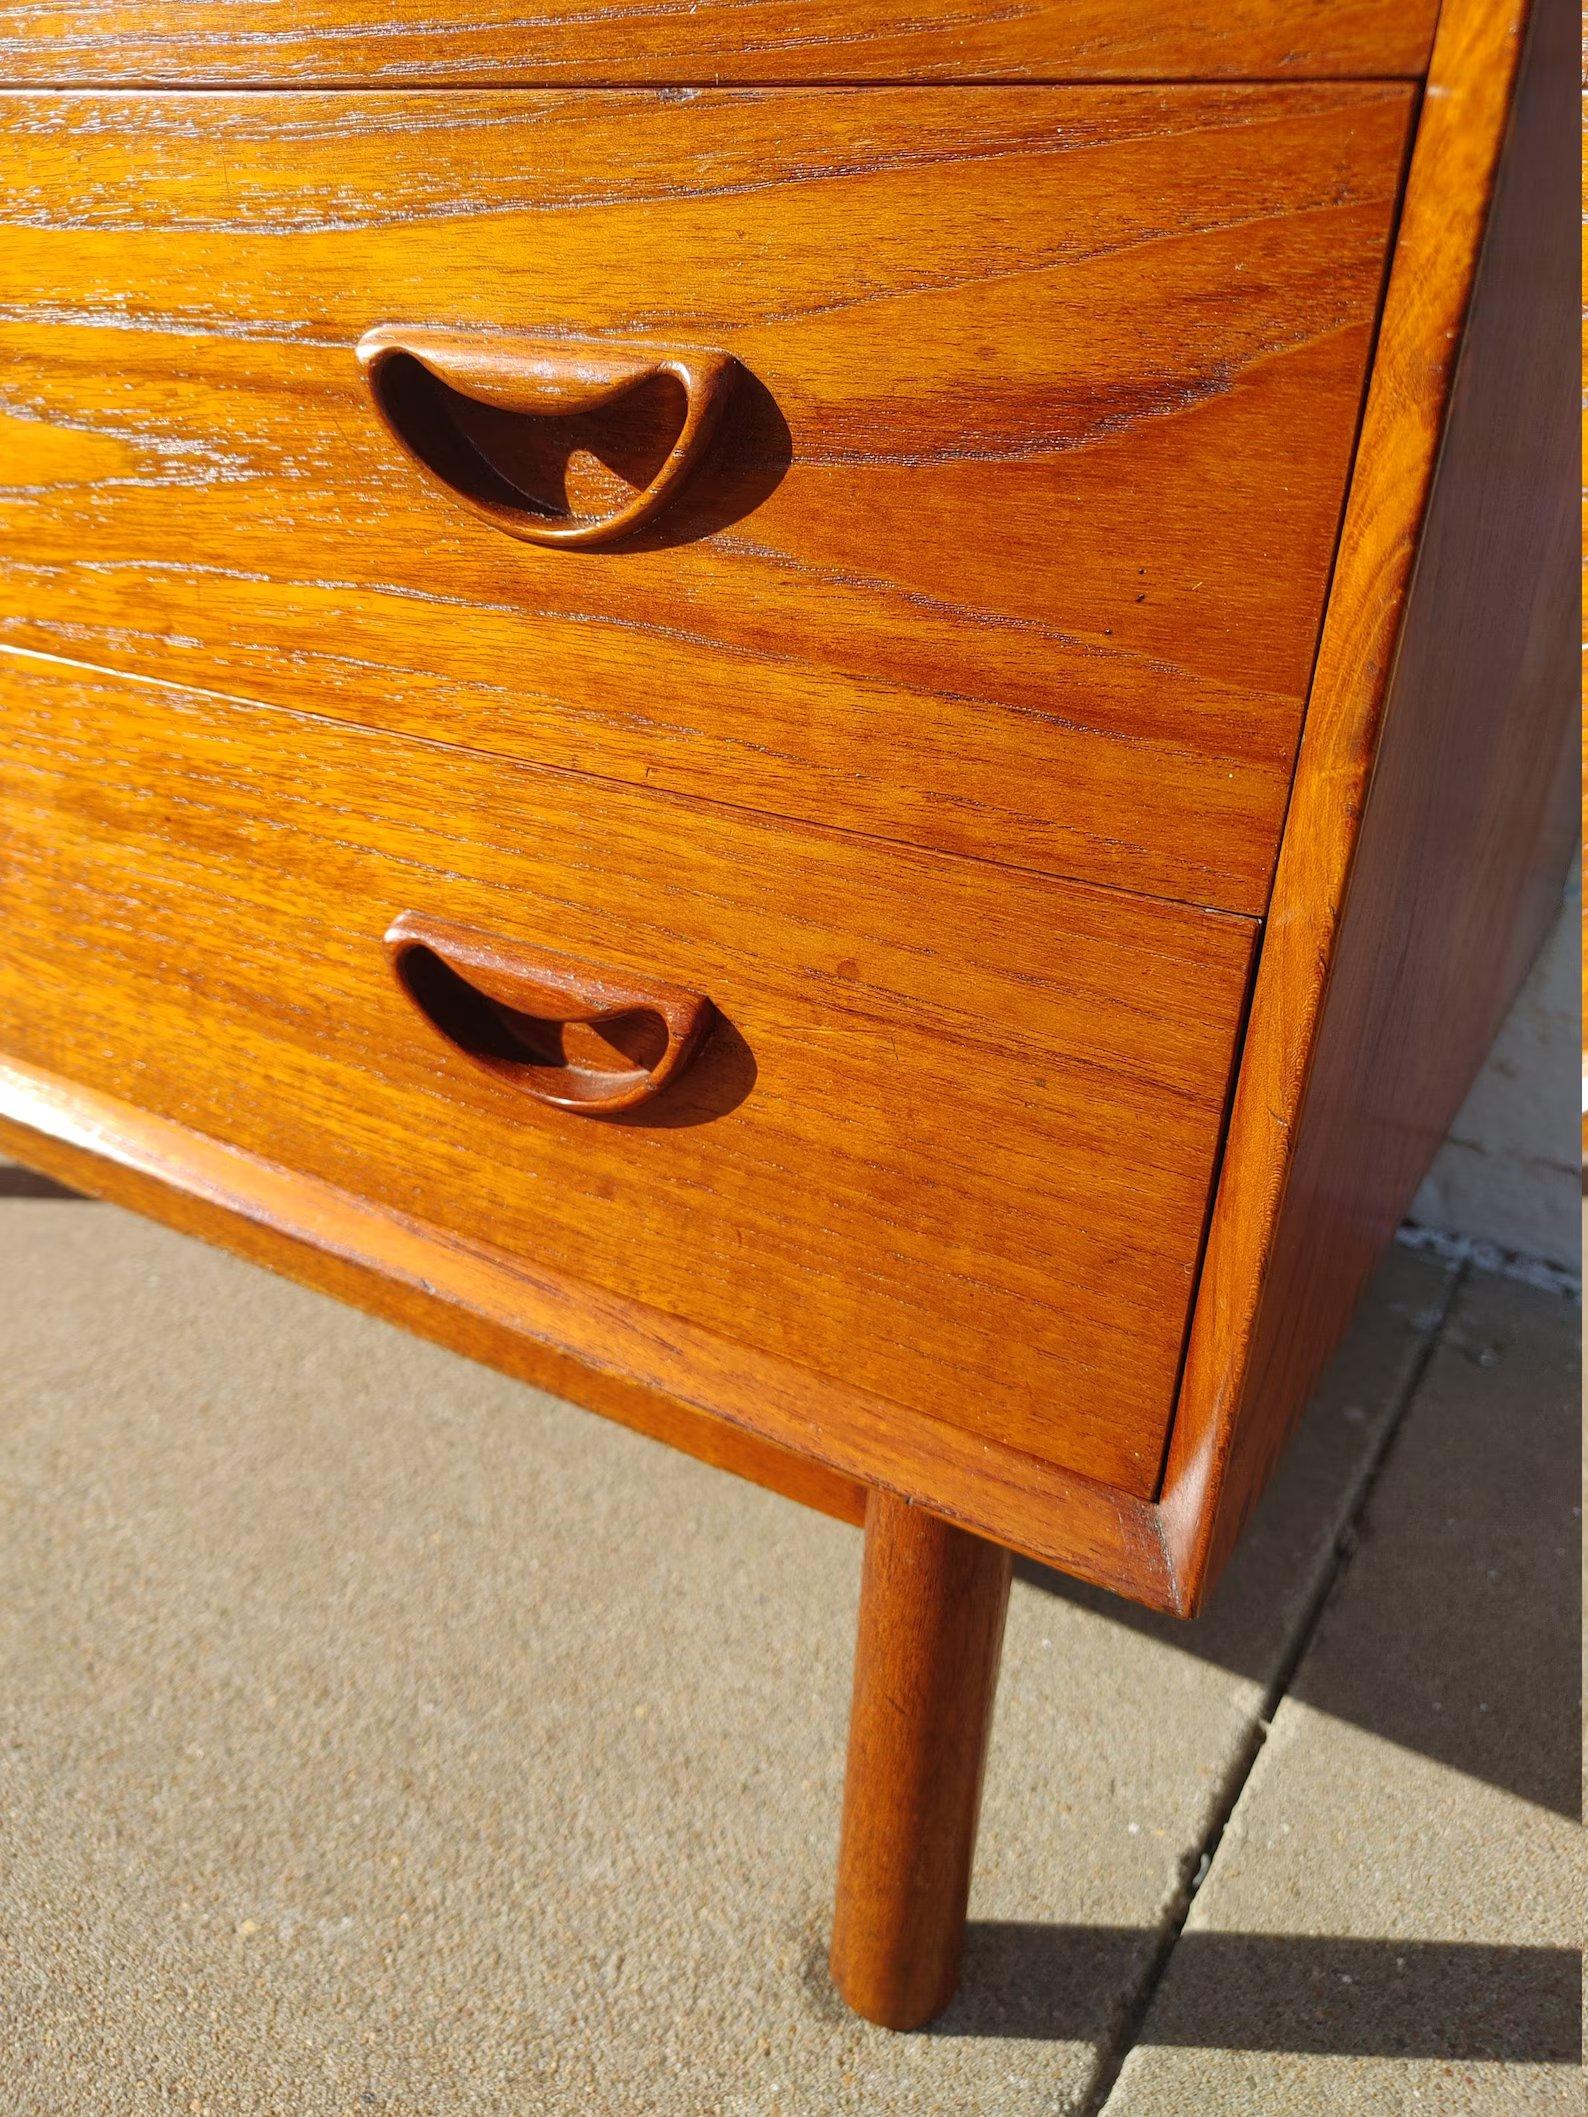 Mid Century Modern Hvidt & Molgaard Teak Secretary
Above average vintage condition and structurally sound. Has some expected small scratches and finish wear due to age.  Beautiful construction with the iconic Hvidt Molgaard finger joints. 